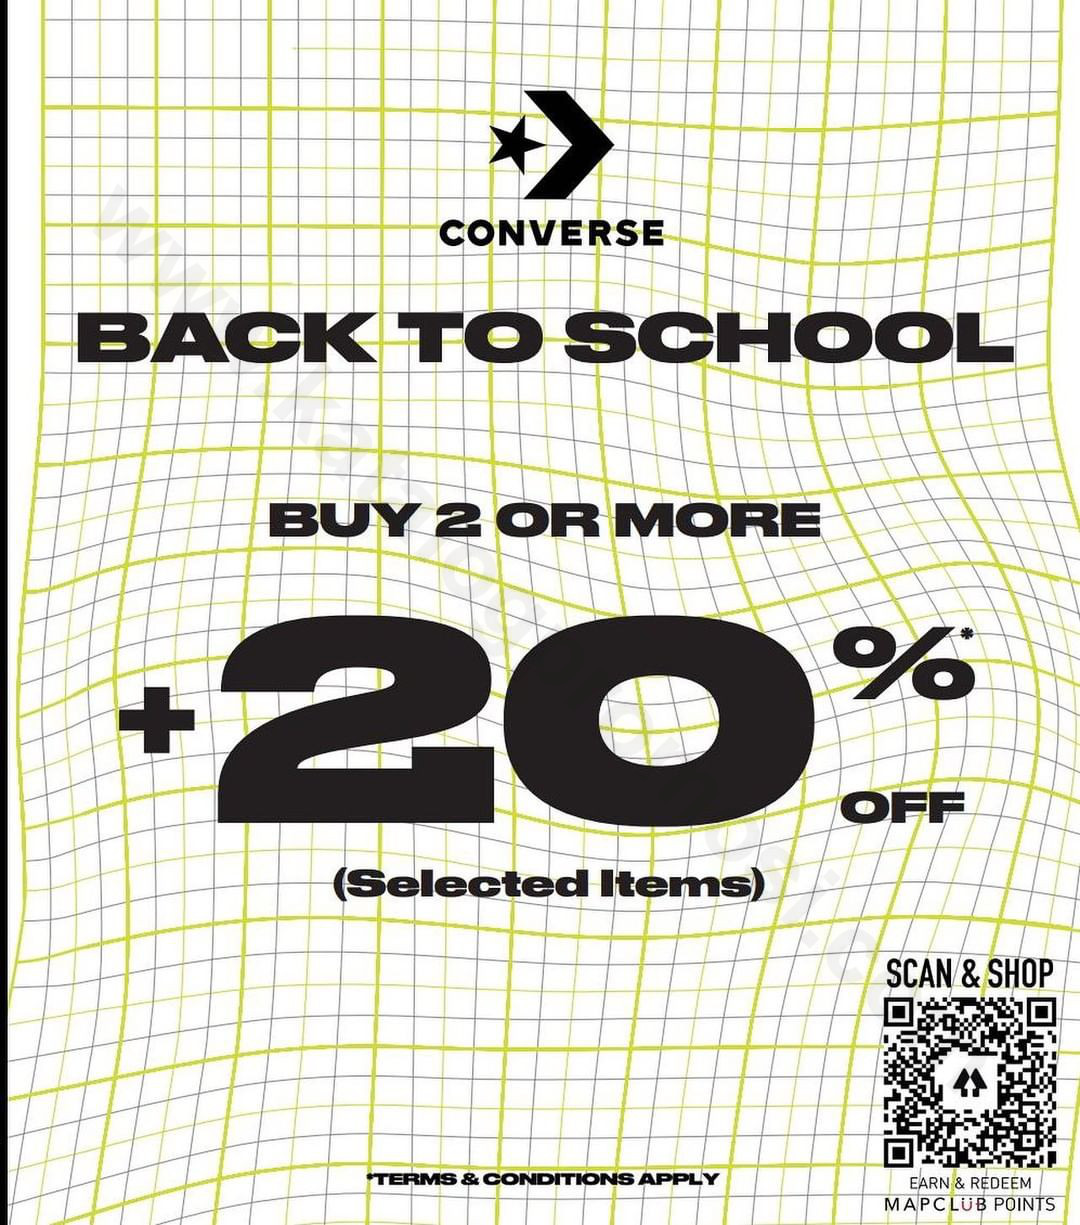 CONVERSE Promo back To School Buy 2 Or More Disc+20 Off Selected Items*